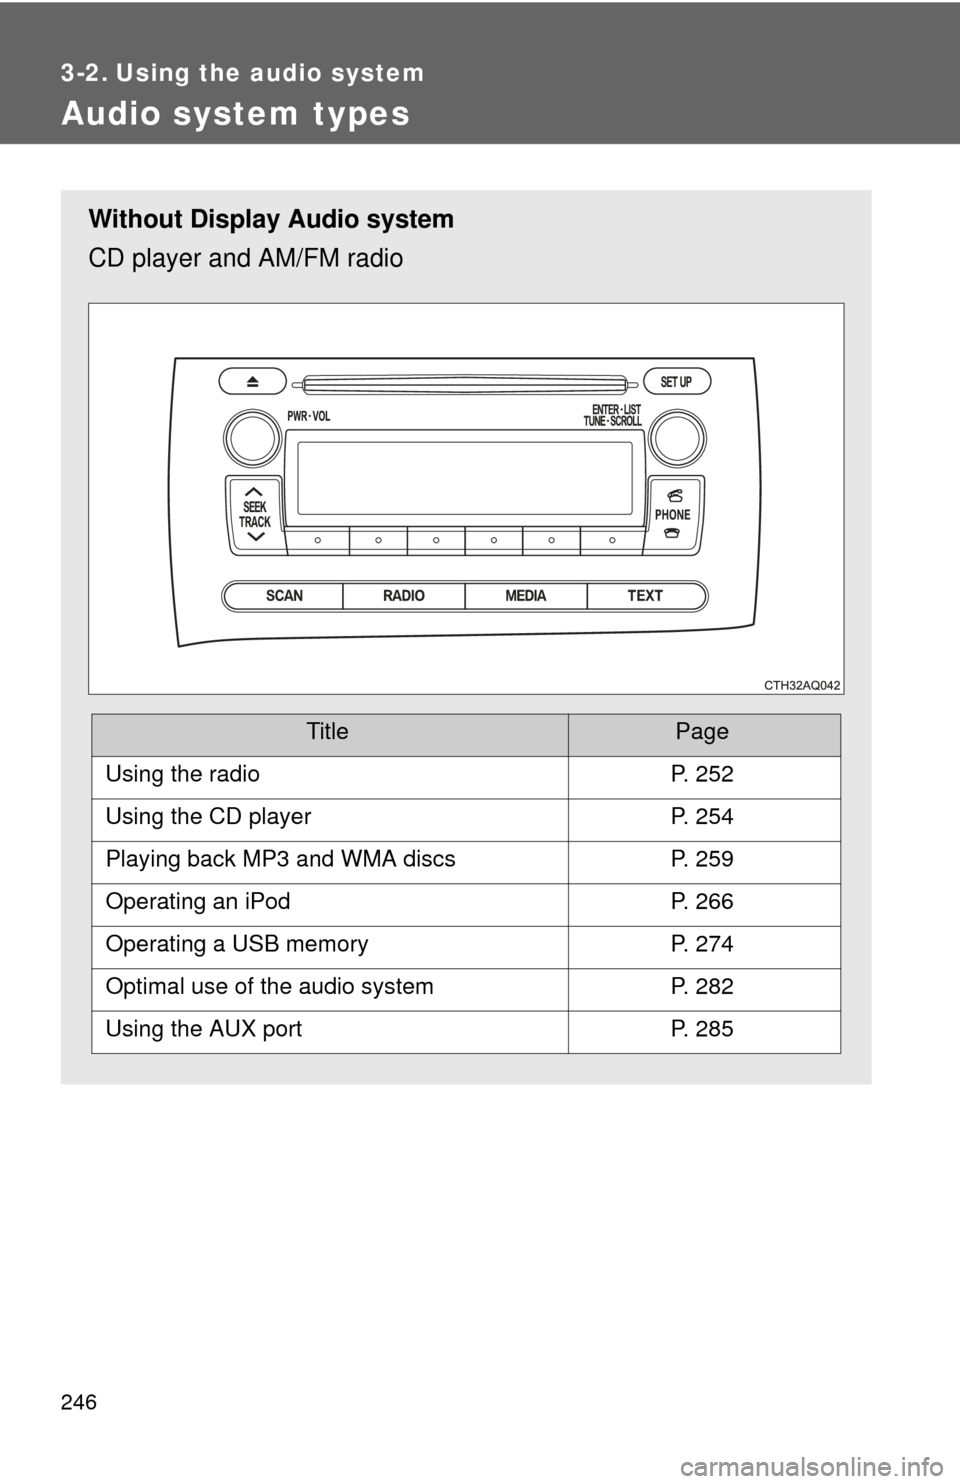 TOYOTA PRIUS C 2012 NHP10 / 1.G Owners Manual 246
3-2. Using the audio system
Audio system types
Without Display Audio system
CD player and AM/FM radio
TitlePage
Using the radioP. 252
Using the CD playerP. 254
Playing back MP3 and WMA discsP. 259